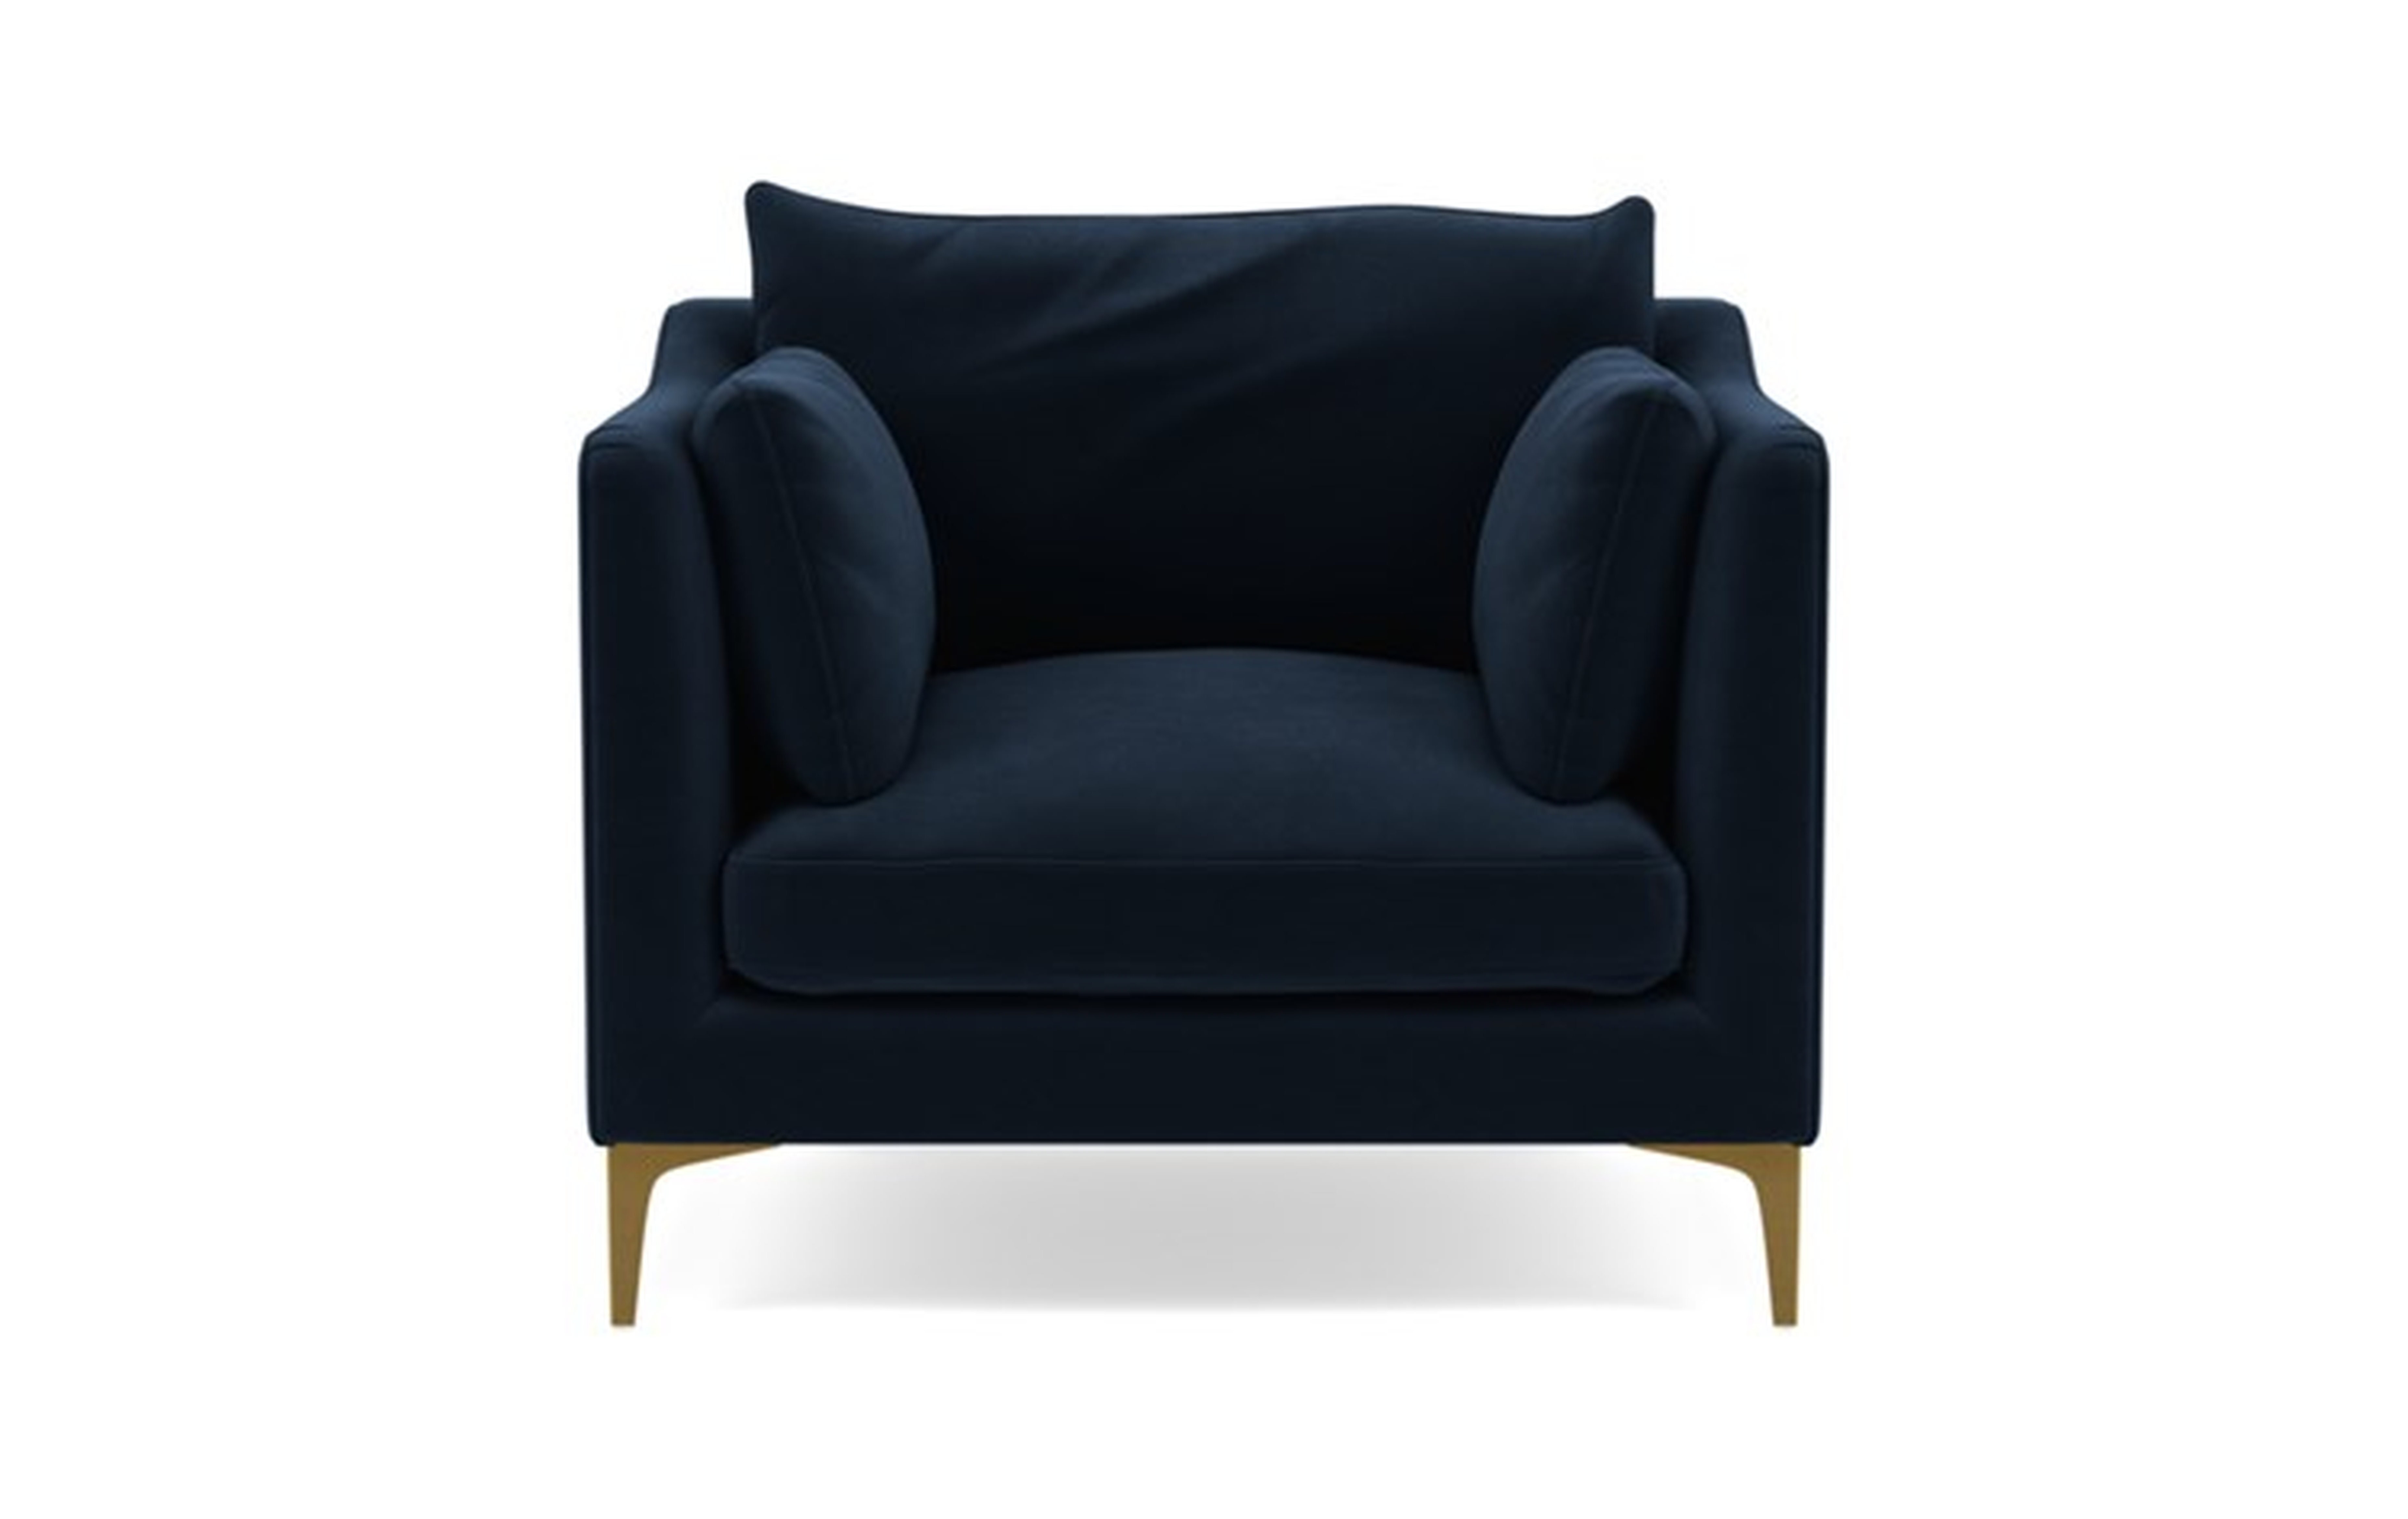 Caitlin by The Everygirl Chairs in Navy Fabric with Brass Plated legs - Interior Define